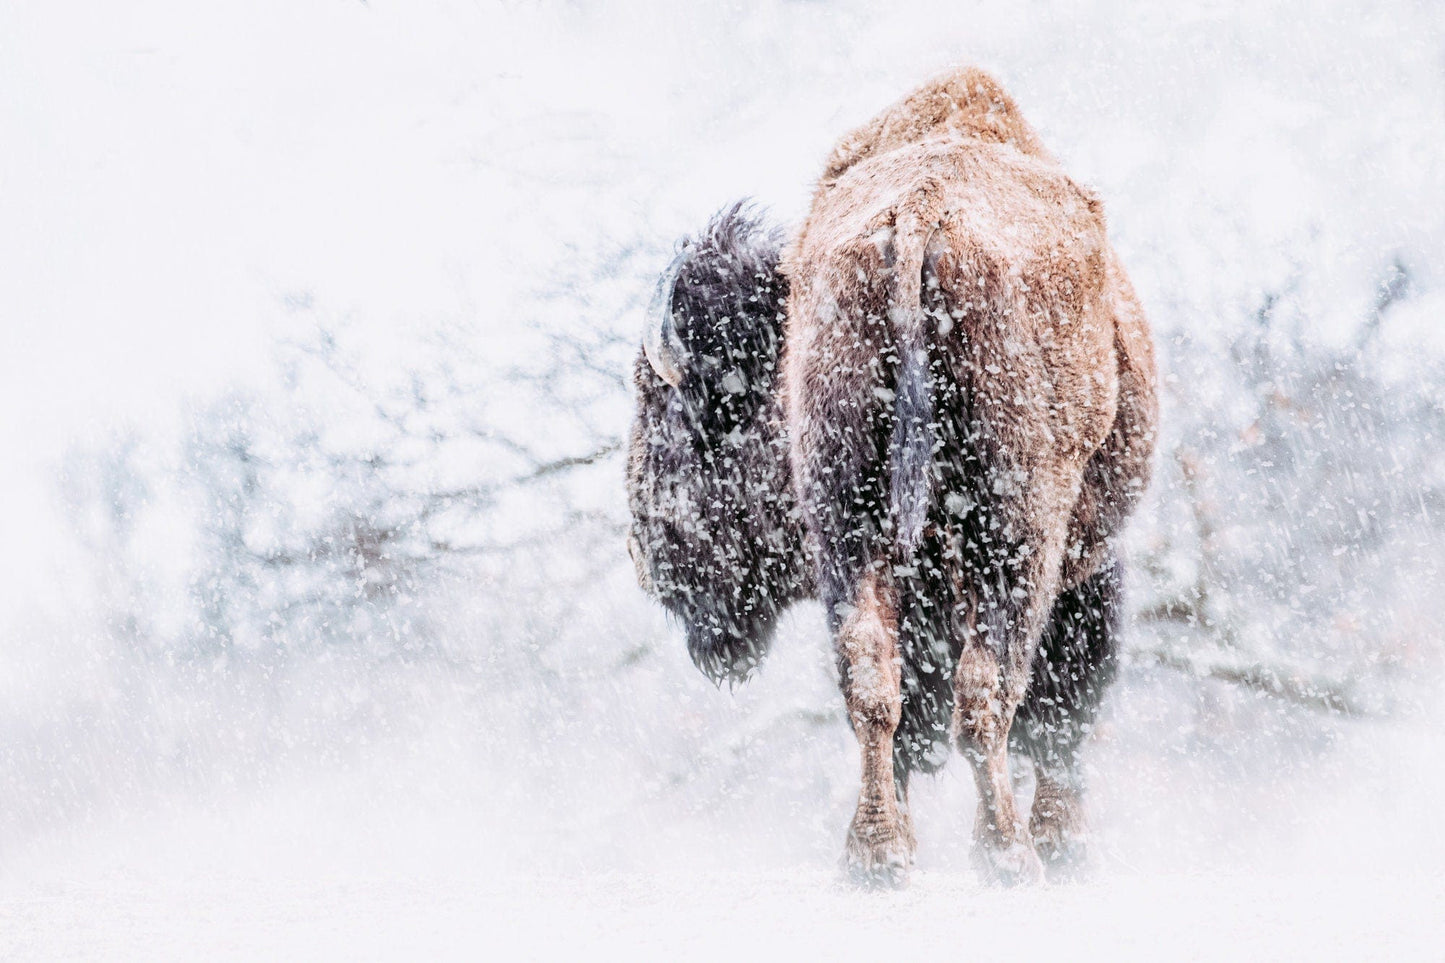 Bison in a Blizzard Canvas Paper Photo Print / 12 x 18 Inches Wall Art Teri James Photography